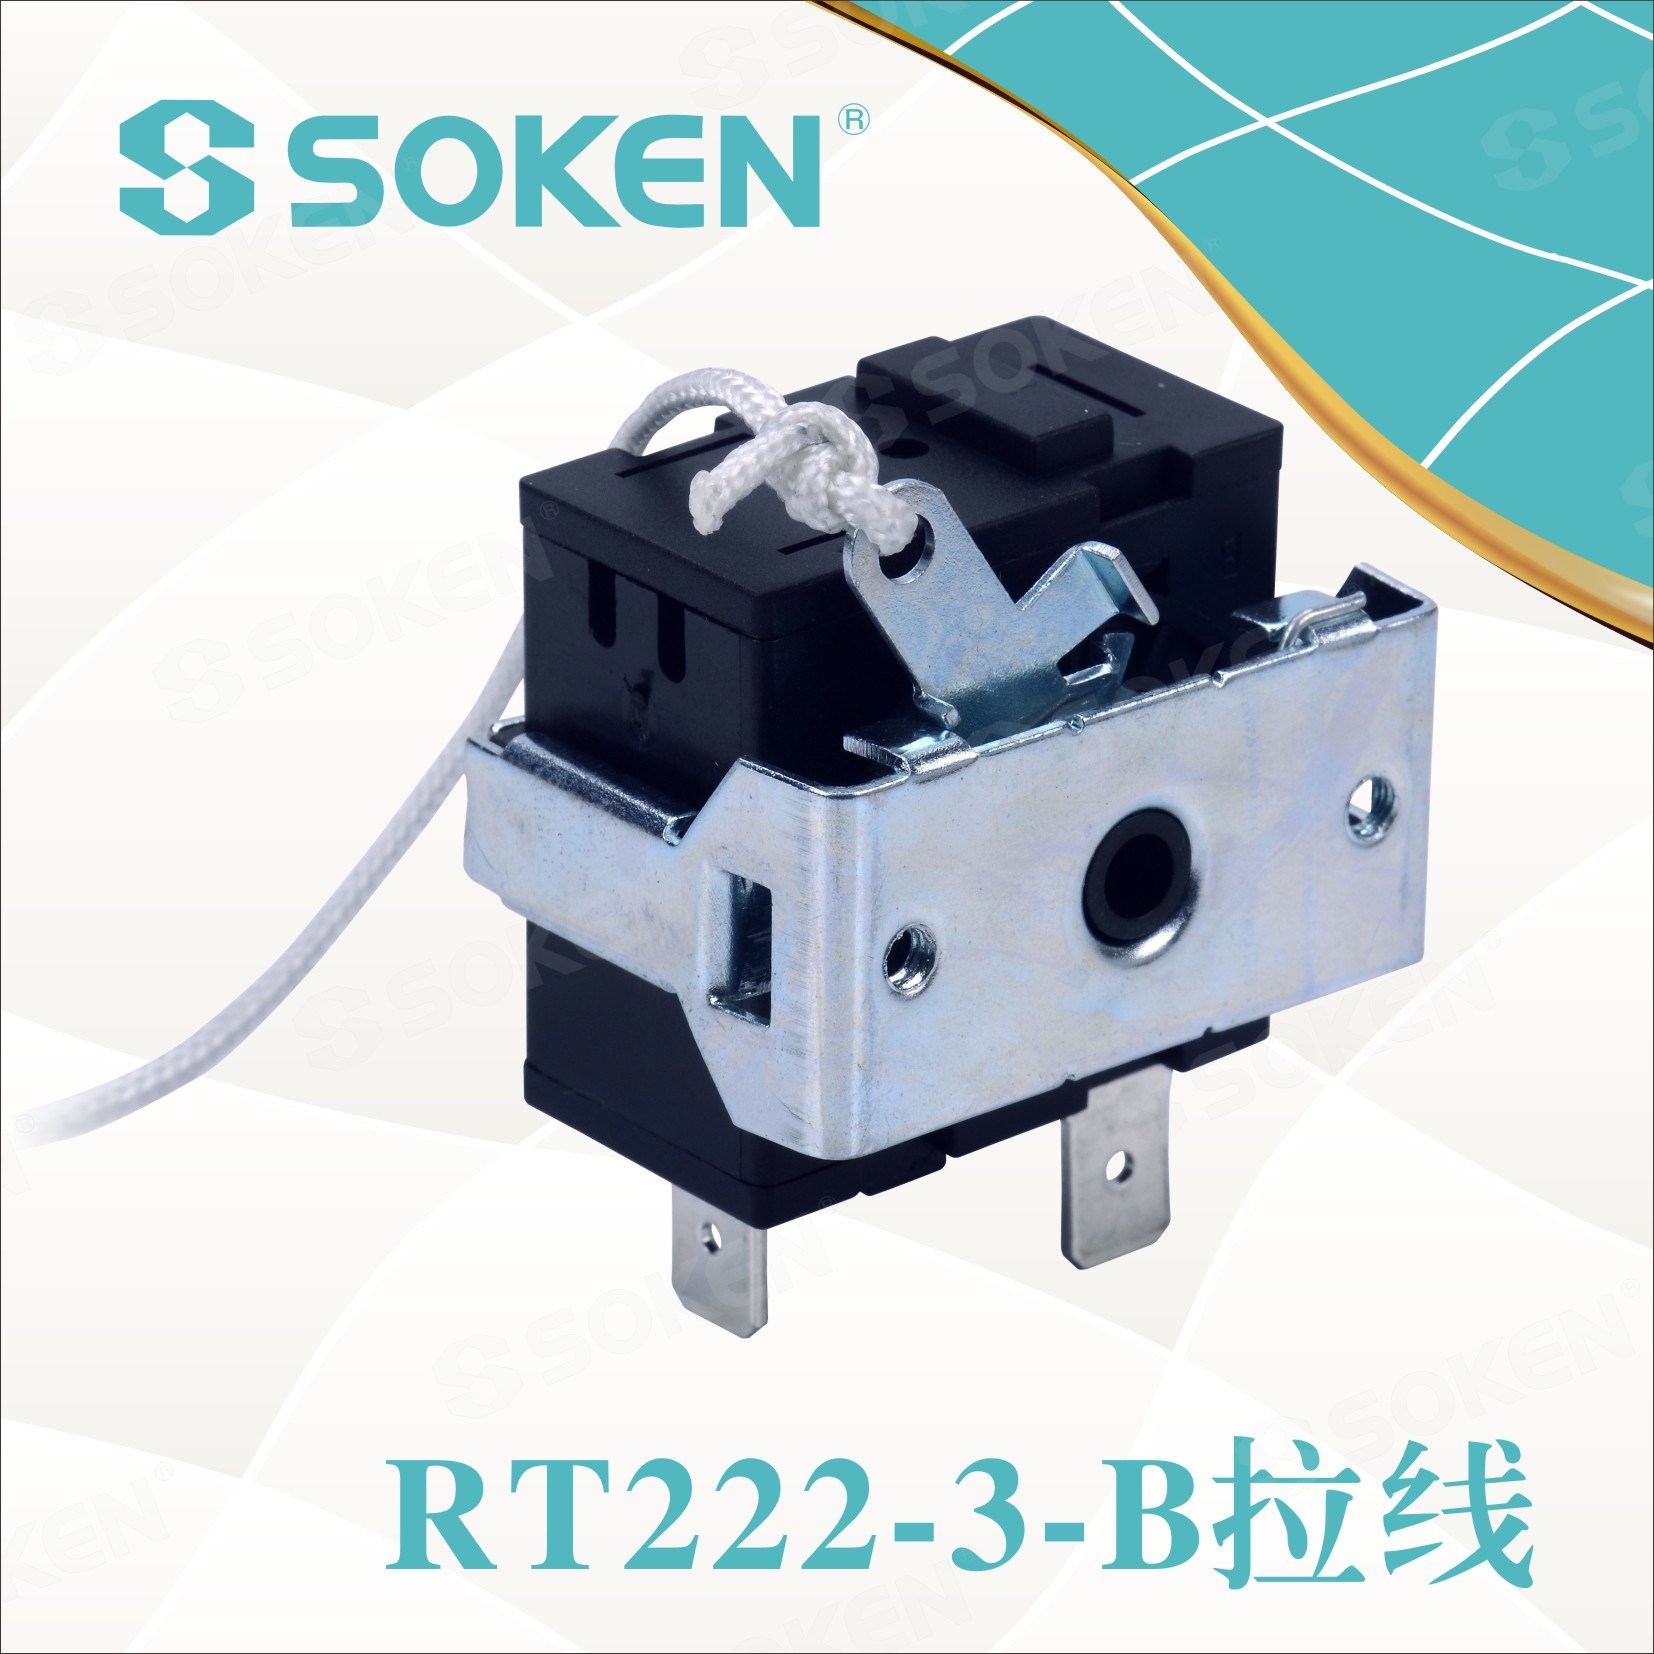 Soken-12-Position-Pull-Chain-Rotary-Switch1860